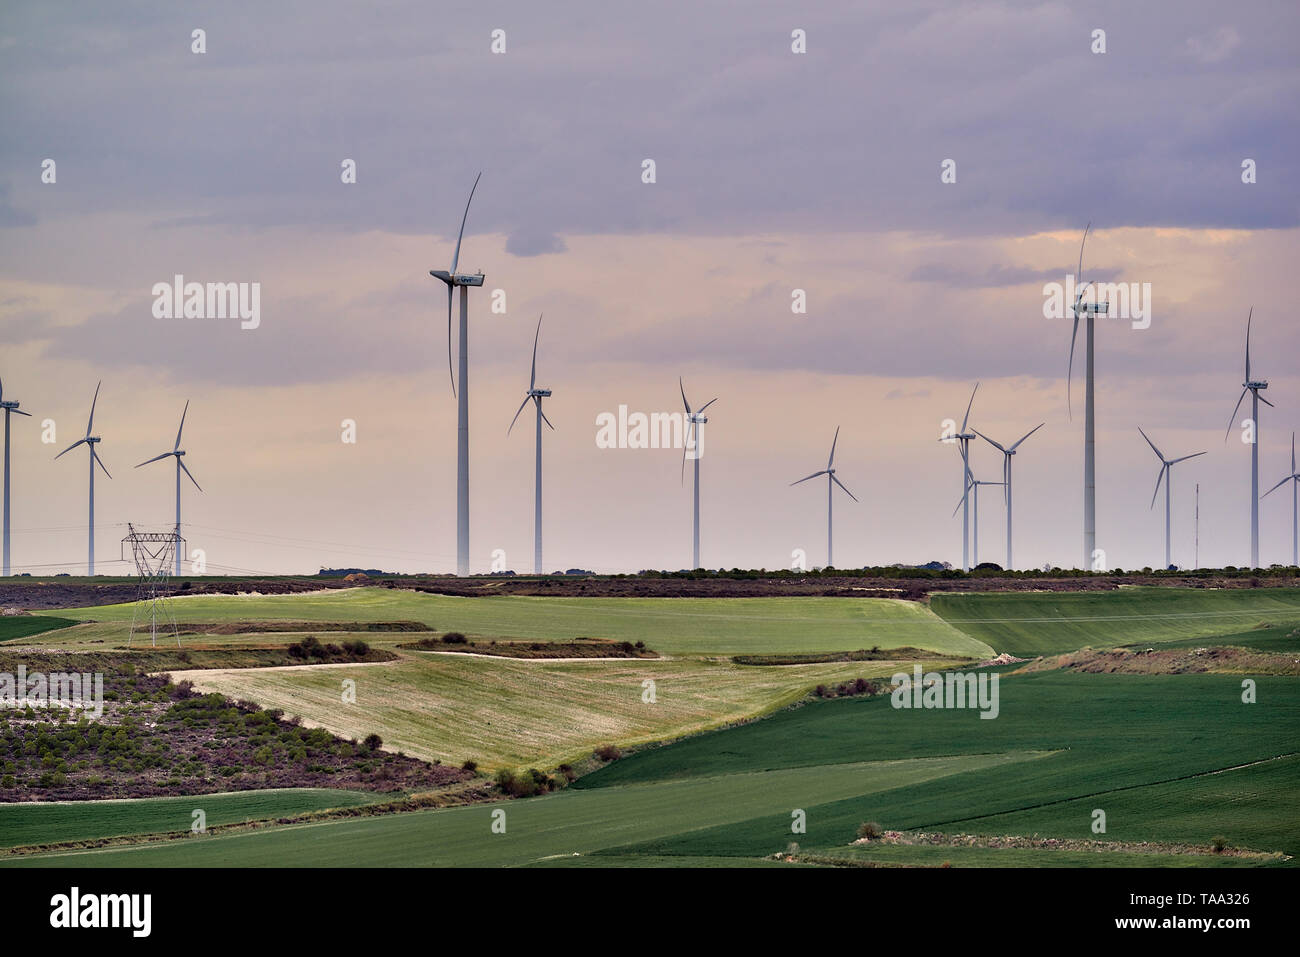 Spanish wind farm. Parque Eolico in the province of Valladolid a wind farm located near the village  Peñaflor of Hornija, Castile and Leon, Spain Stock Photo